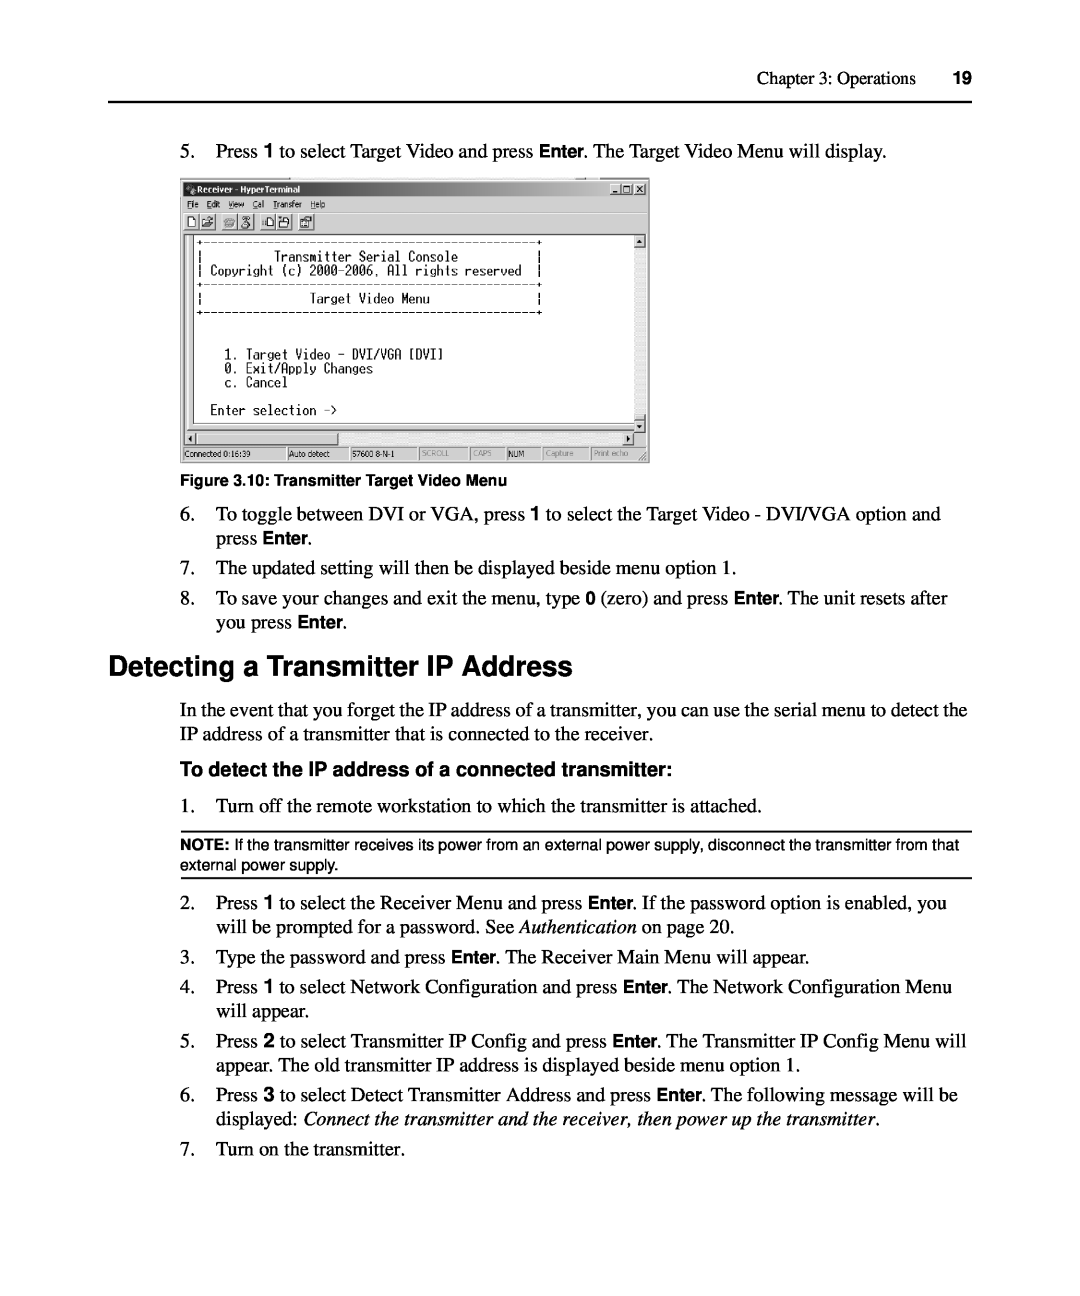 Avocent LongView IP manual Detecting a Transmitter IP Address, To detect the IP address of a connected transmitter 